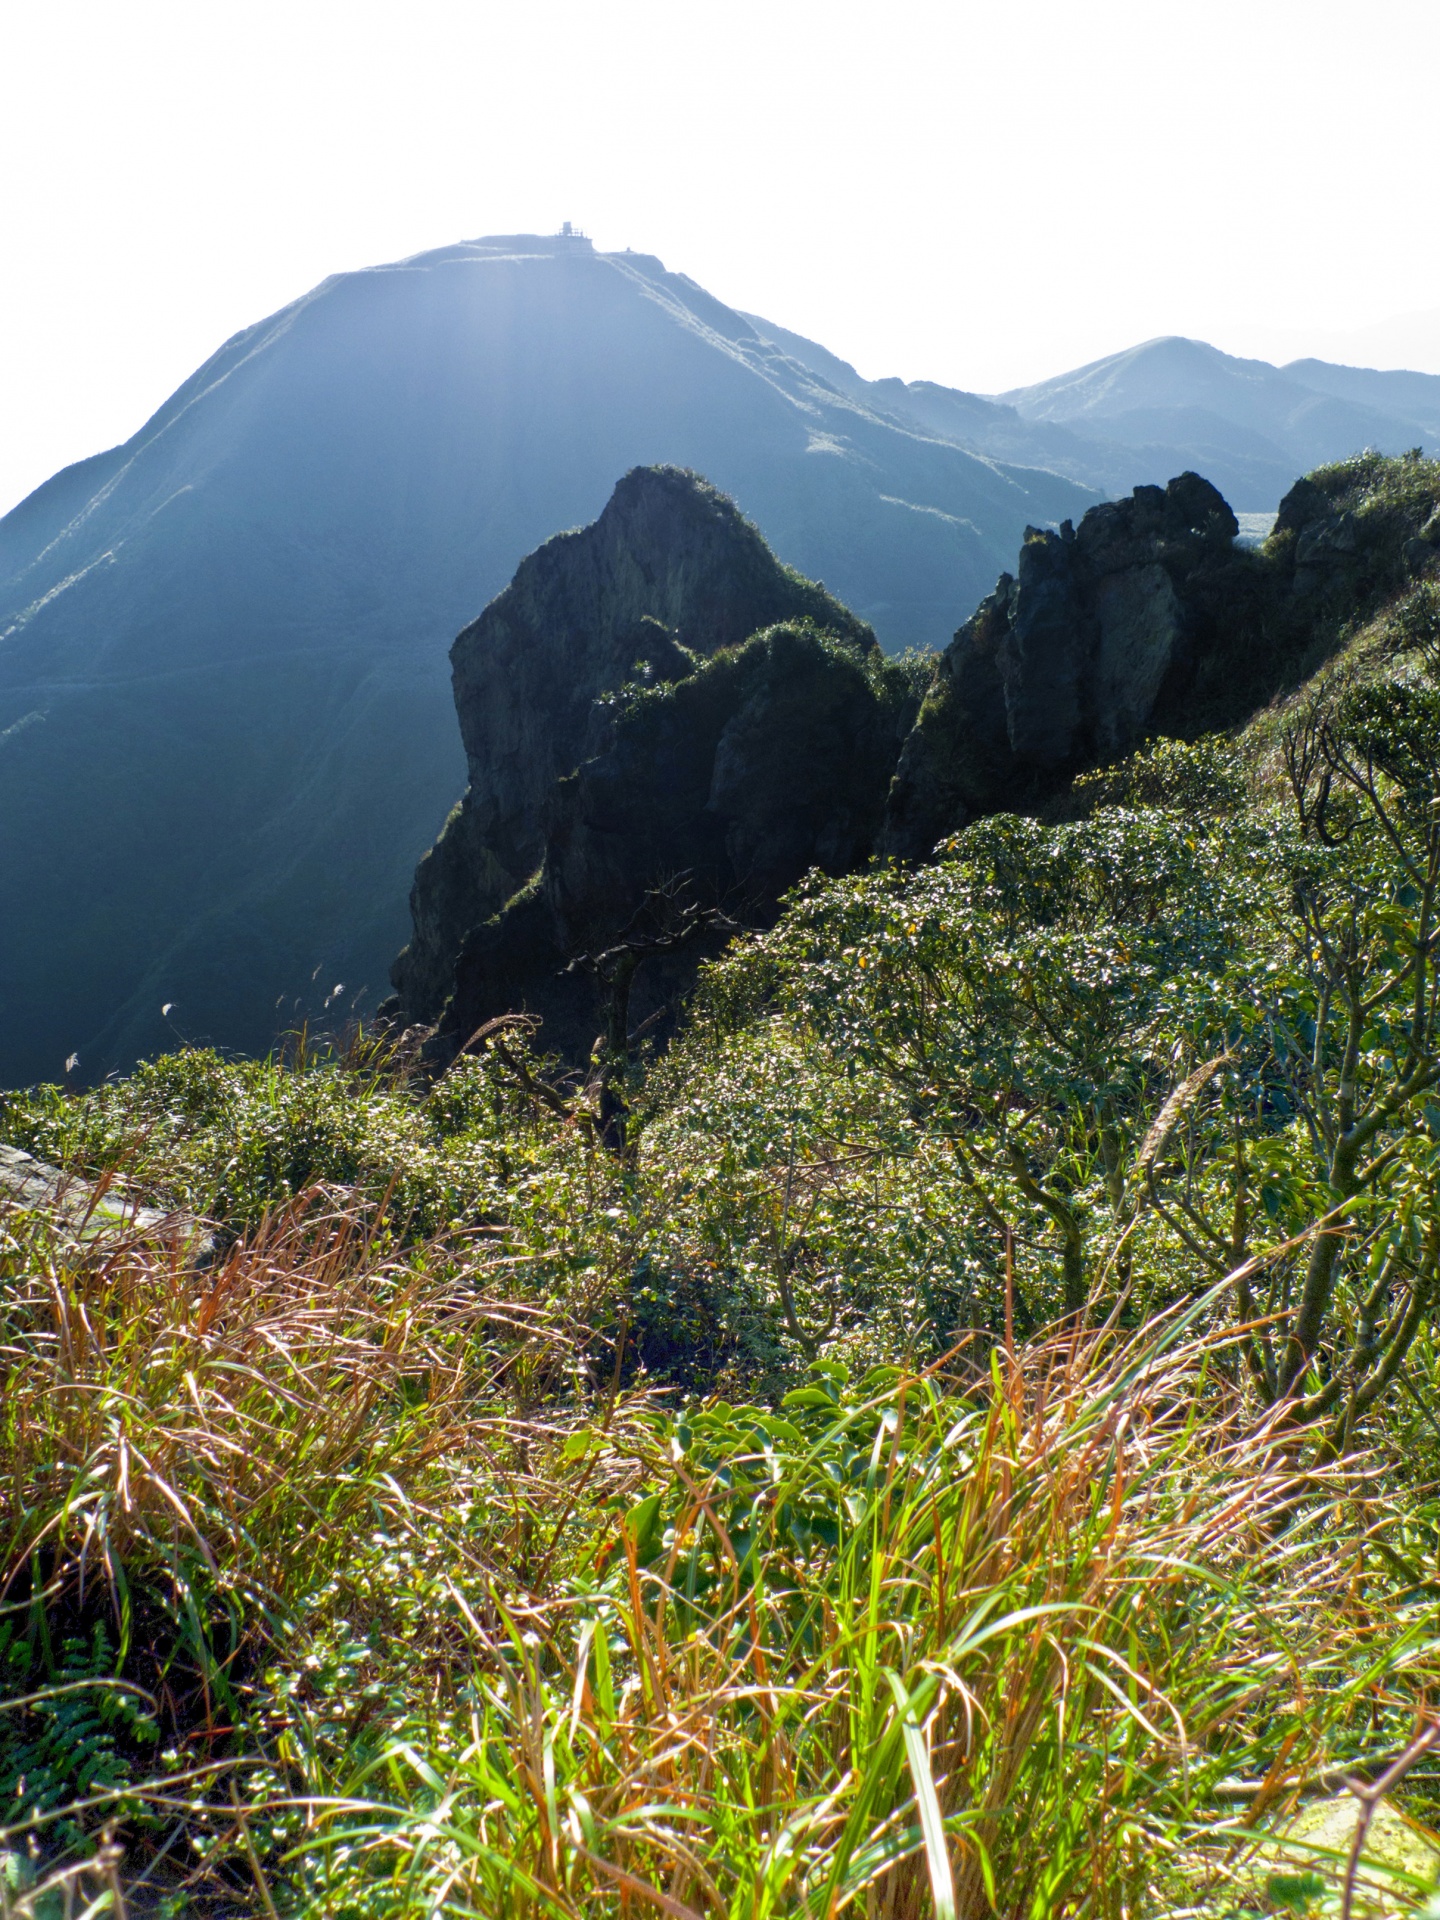 A large slab of volcanic rock, with Tsaoshan Grass Mountain in the background, Banpingshan Trail, Ruifang